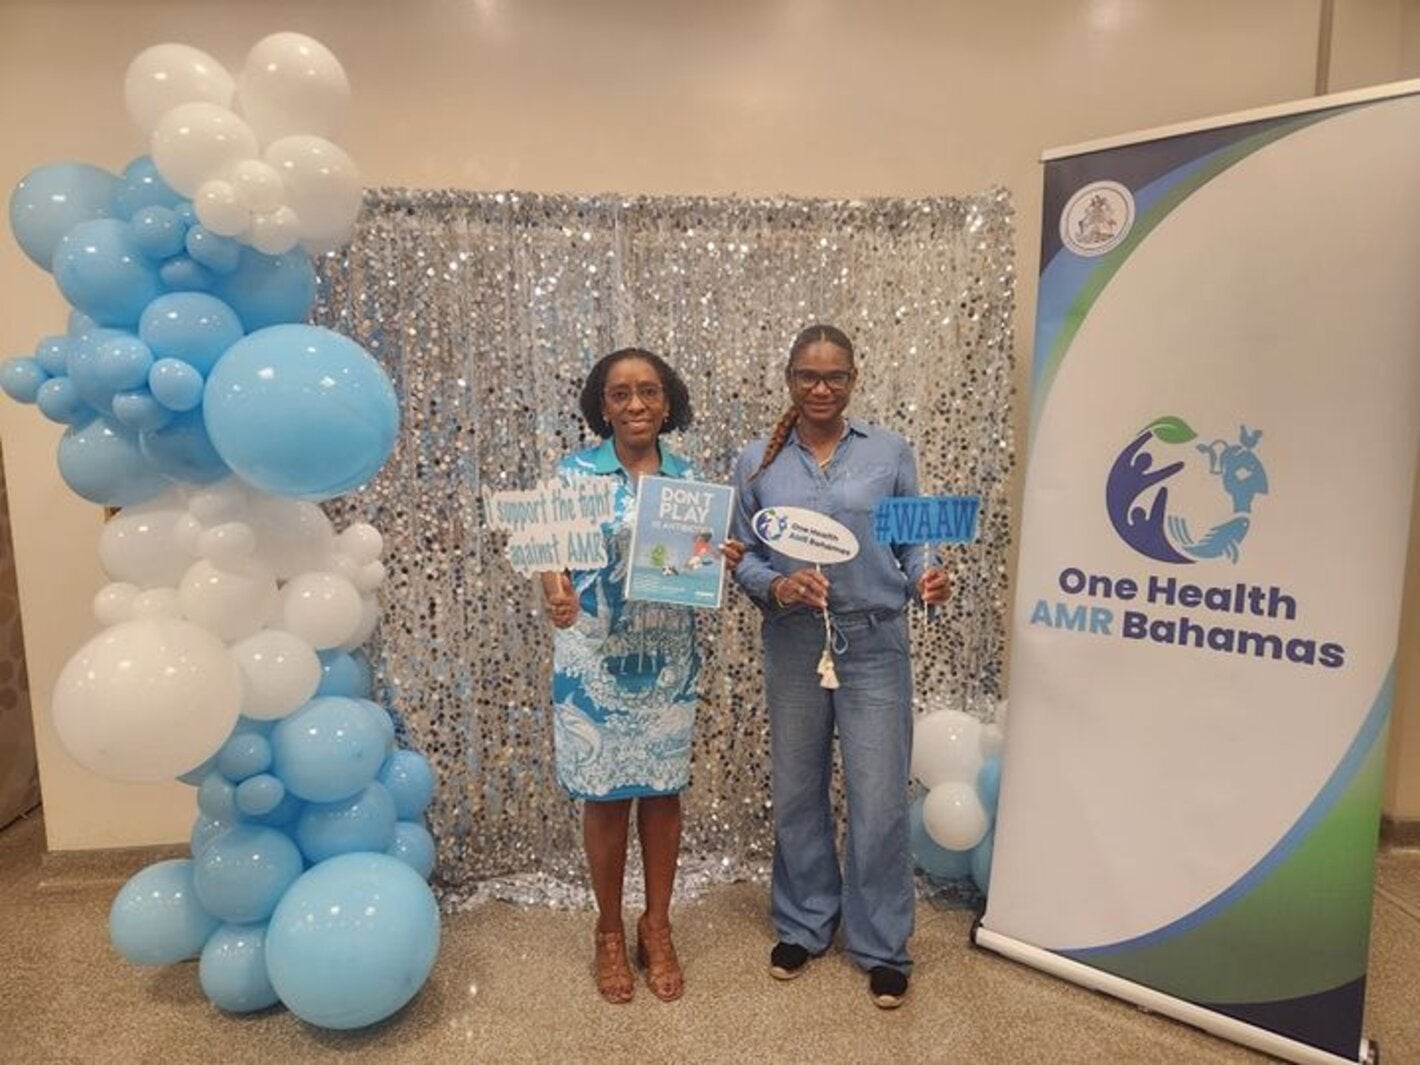 Celebrating World AMR! Dr. Eldonna Boisson, PAHO/WHO Country Representative for The Bahamas and Turks and Caicos Islands, and Dr. Jessica Edwards, AMR Focal Point, Ministry of Health and Wellness pose for a photo during a community outreach